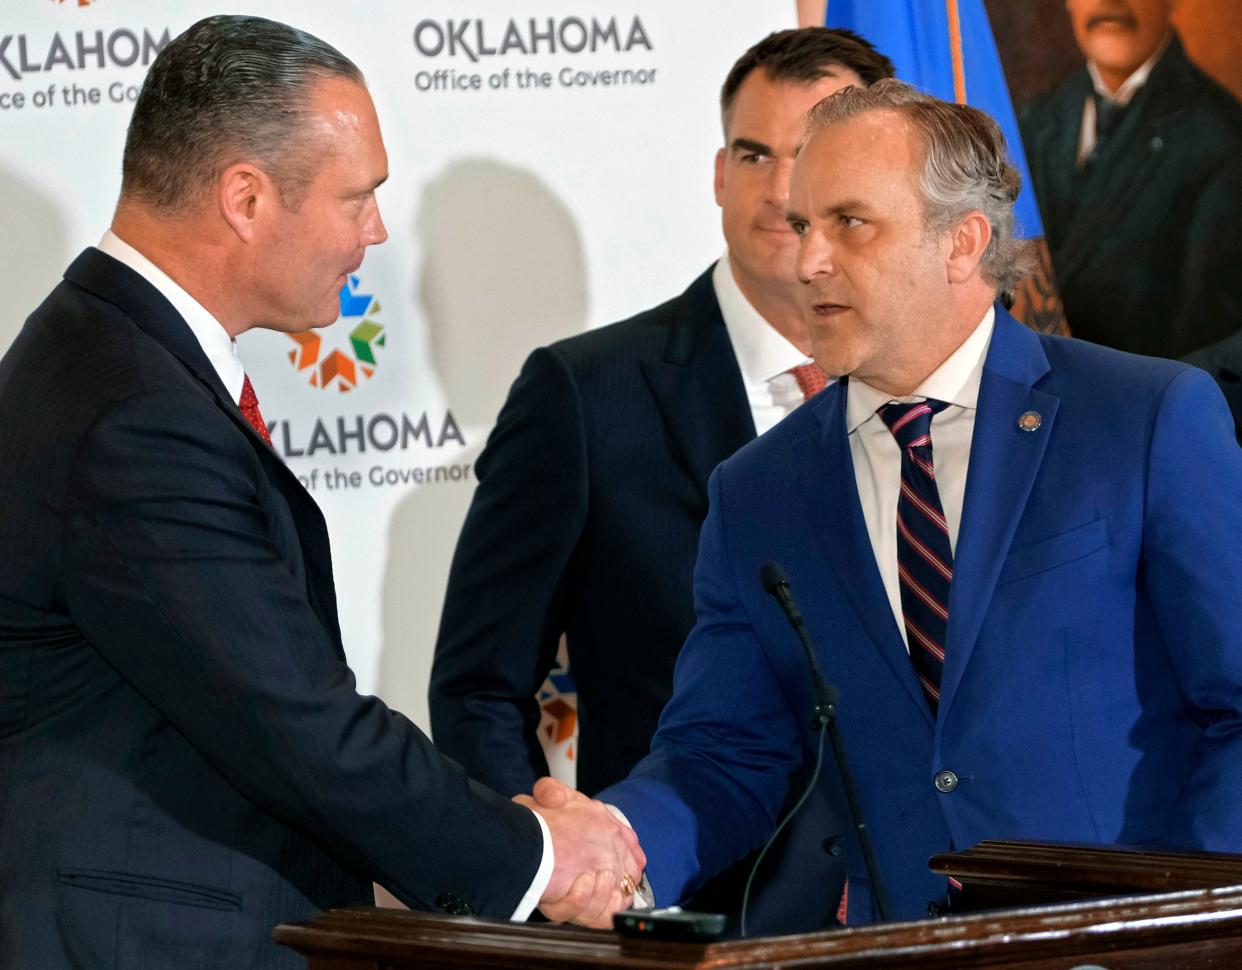 House Speaker Charles McCall, left, welcomes Senate President Pro Tem Greg Treat to the podium as Gov. Kevin Stitt looks on at the Oklahoma Capitol in 2023. Treat is opposed to the income tax cut supported by McCall and Stitt.